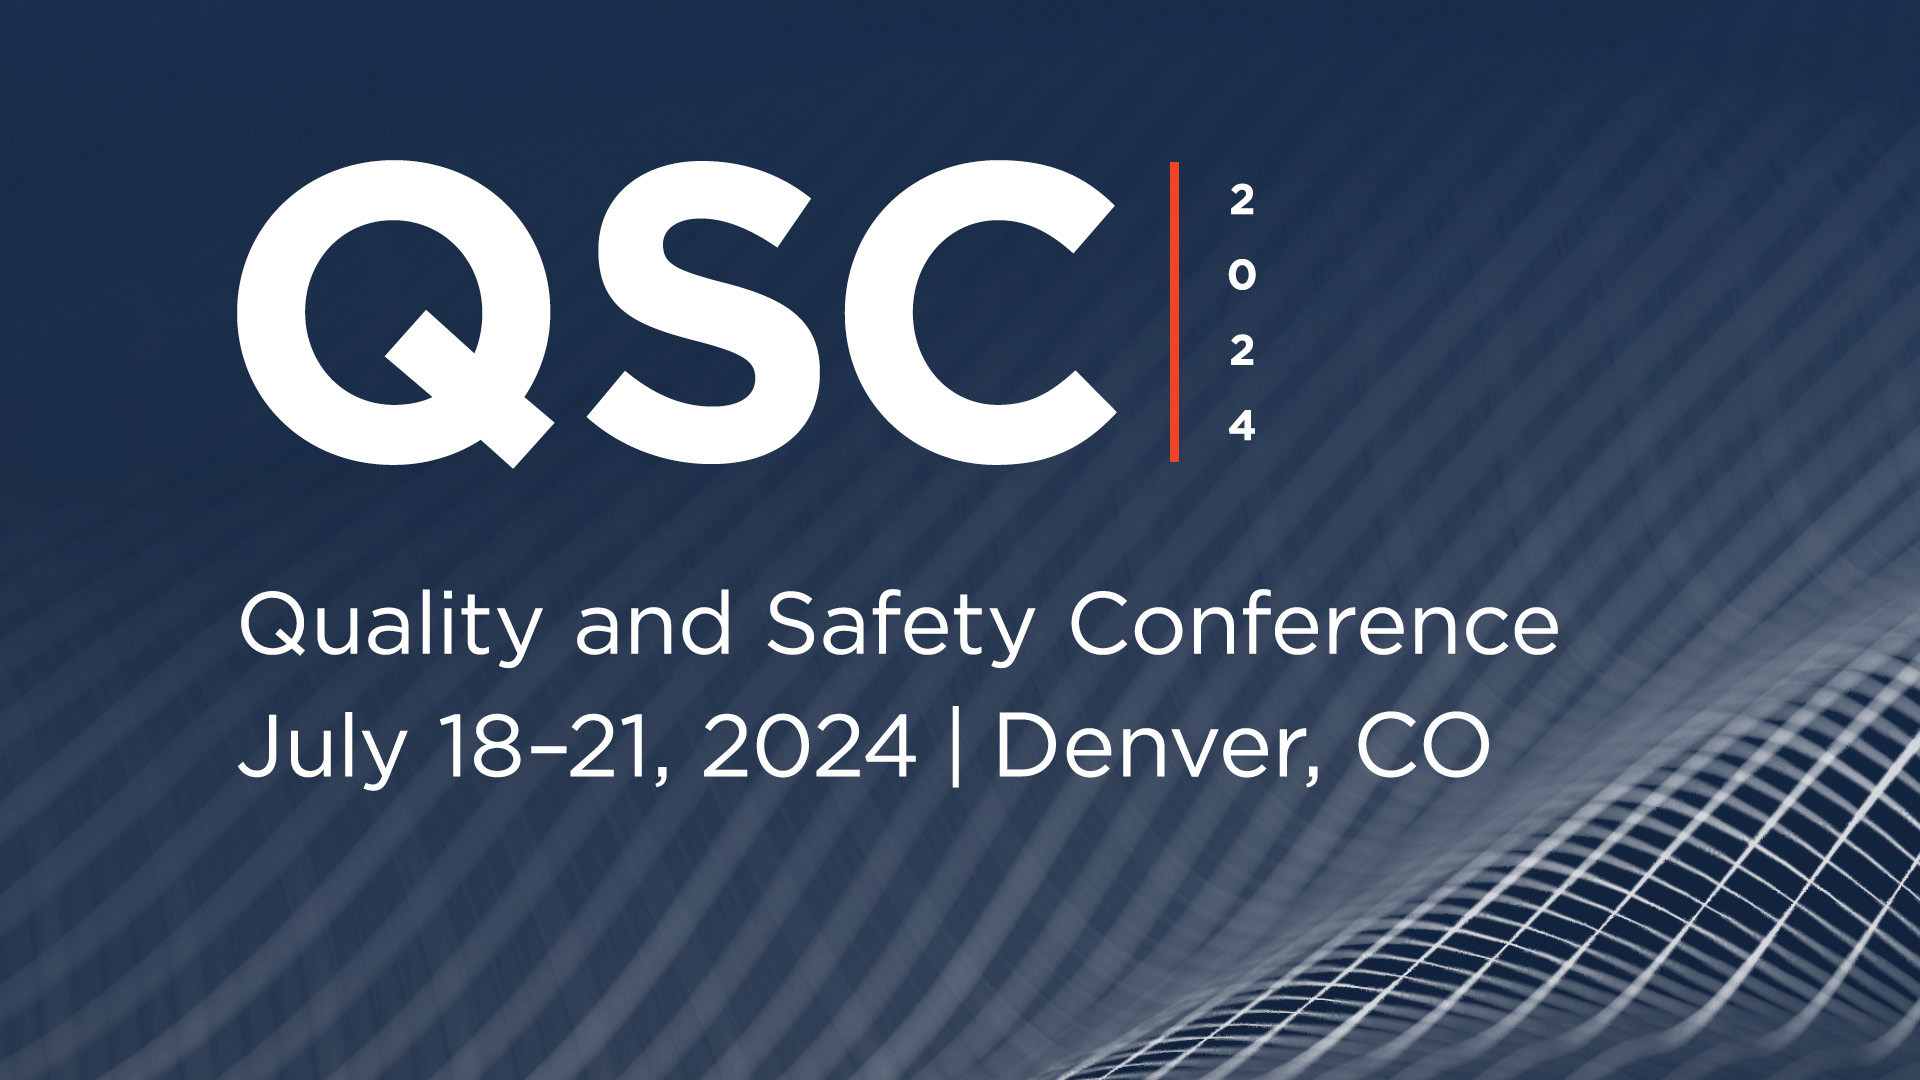 What You Can Expect from This Year’s Quality and Safety Conference